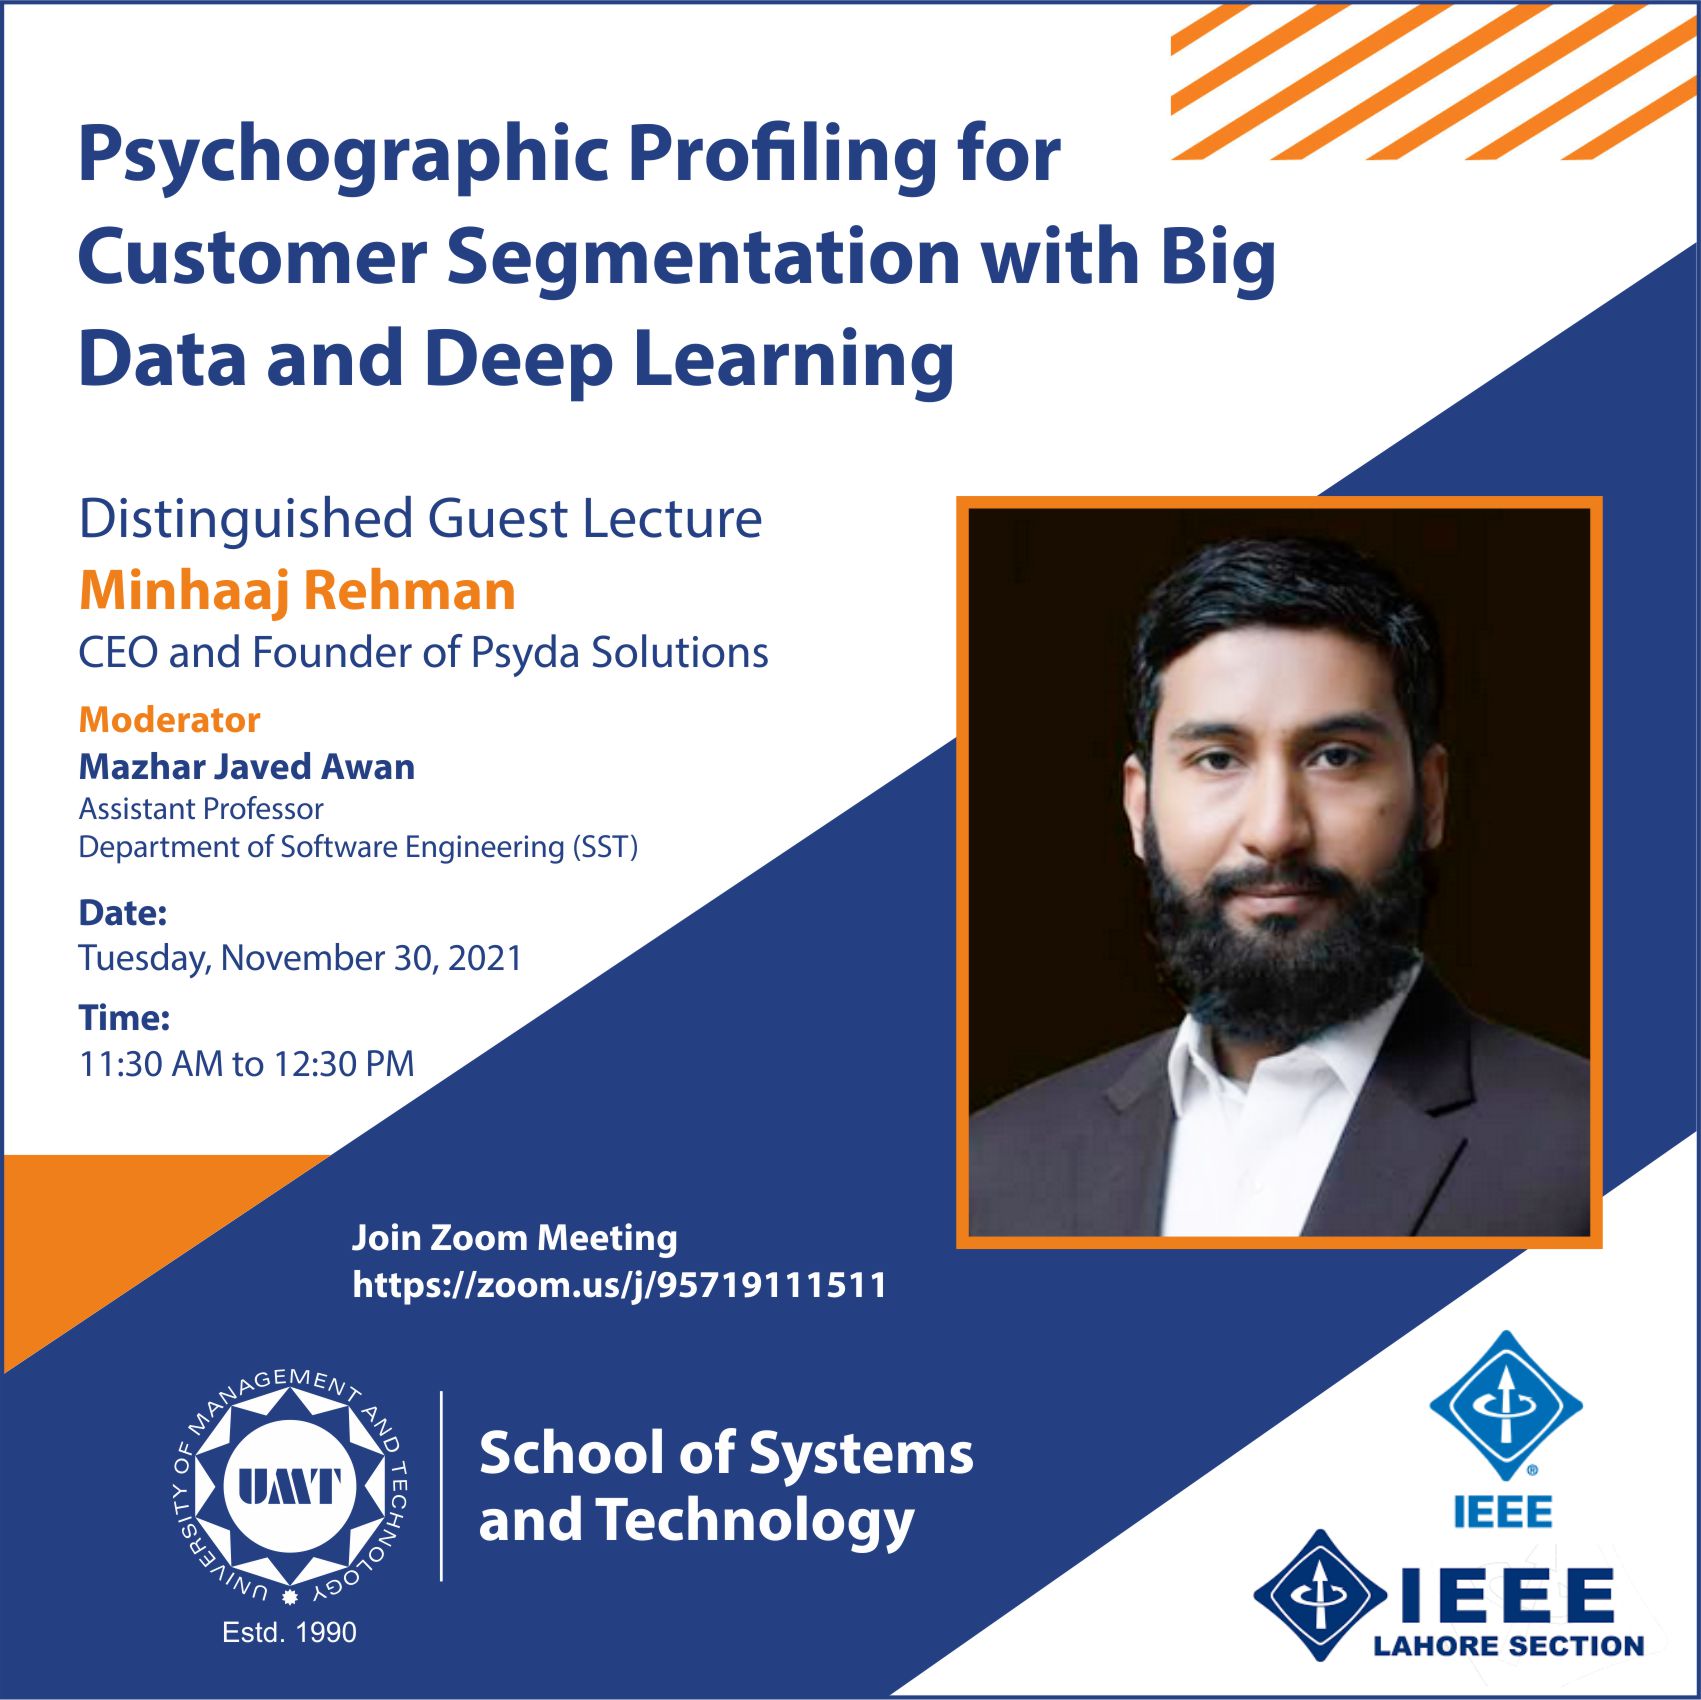 Psychographic Profiling for Customer Segmentation with Big Data and Deep Learning